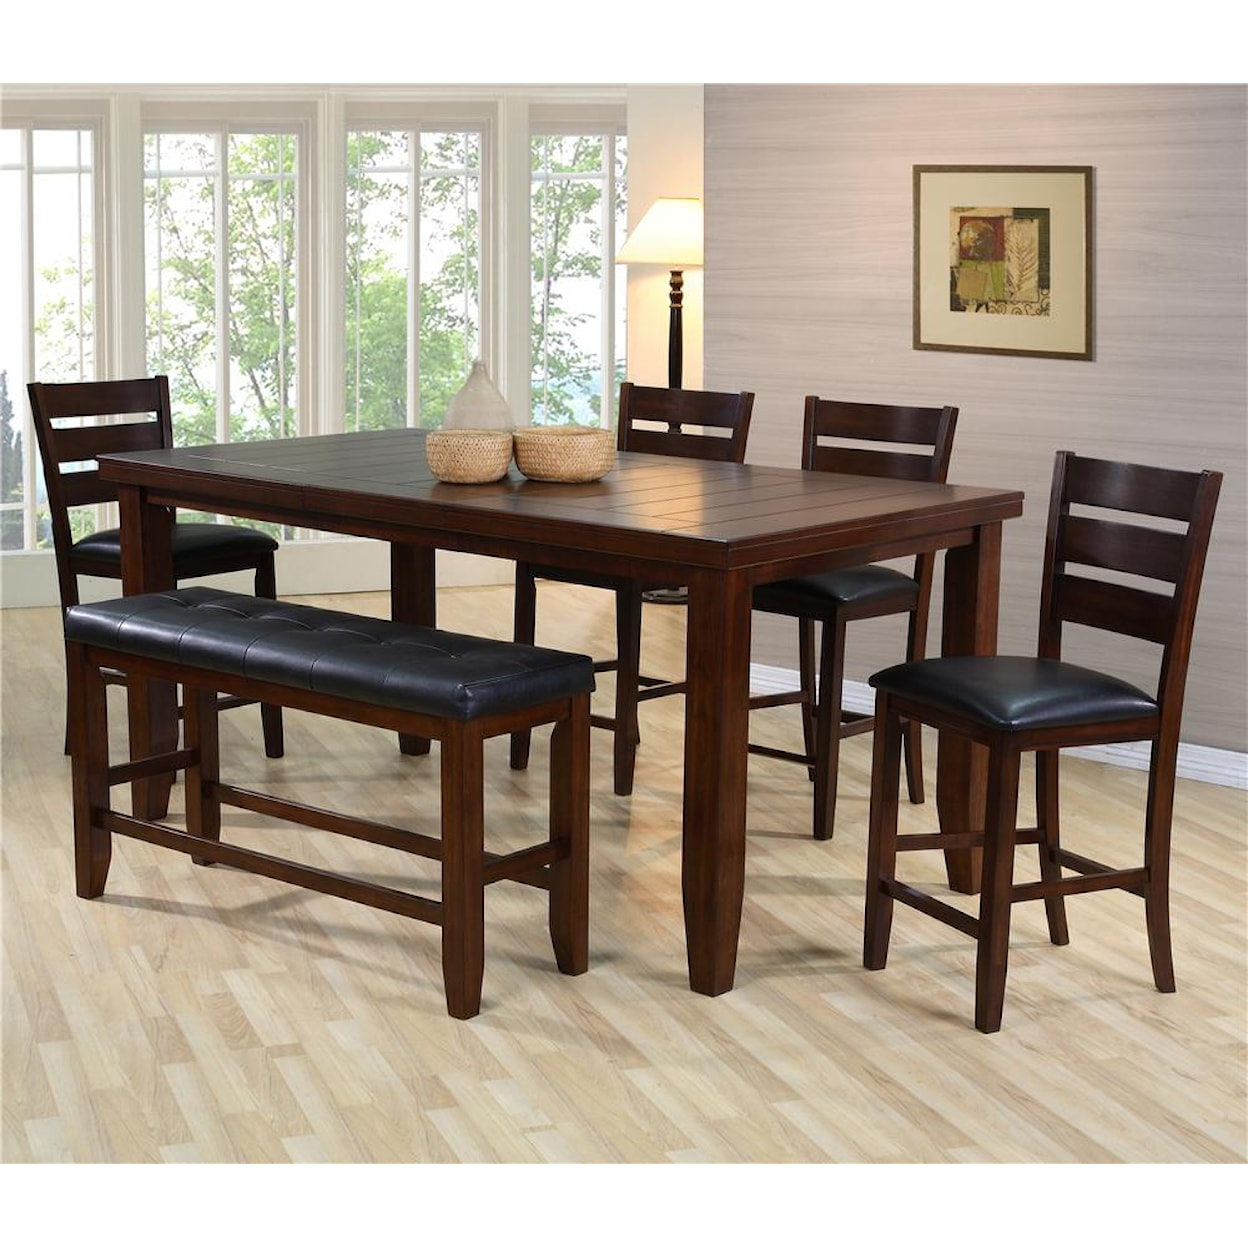 CM Bardstown Pub Table Set with Bench